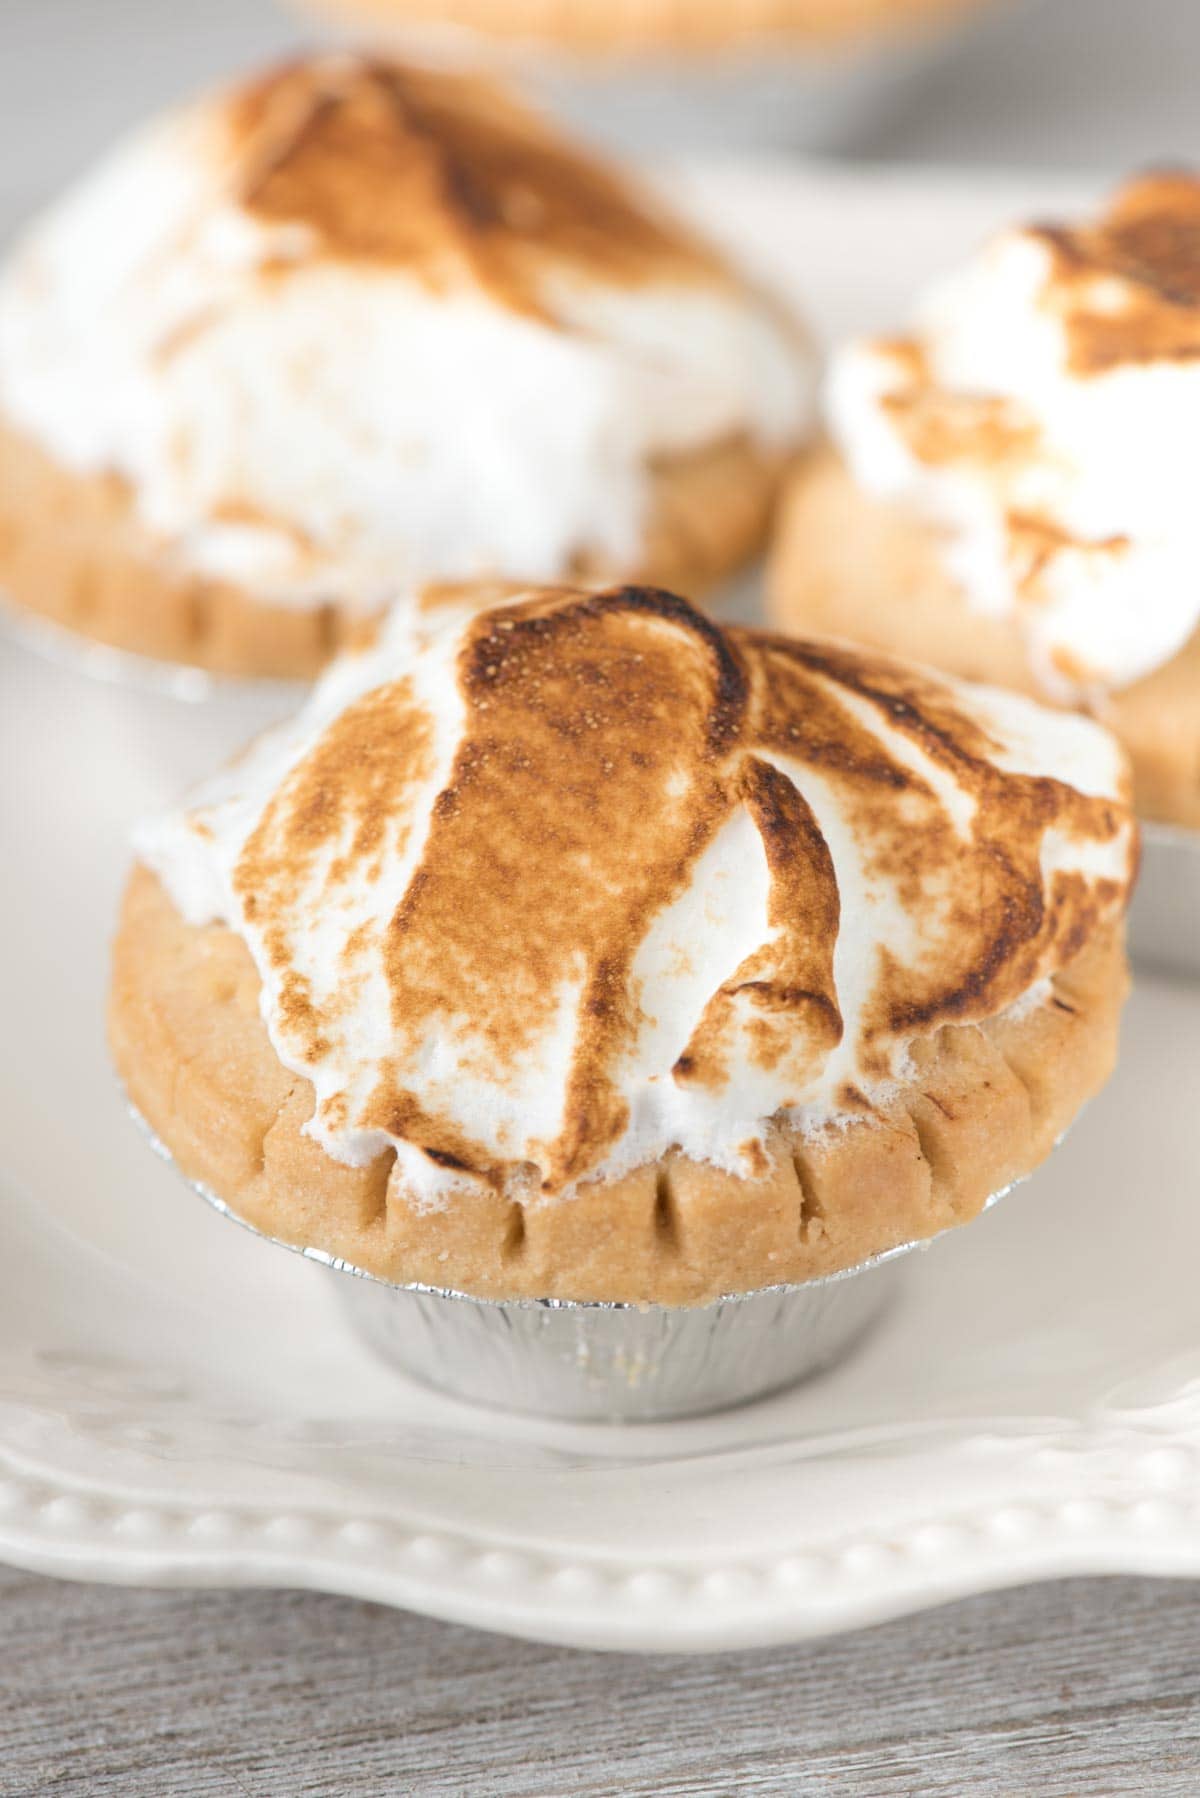 Easy Marshmallow Meringue Frosting - this meringue tastes like a melted marshmallow and is the perfect way to dress up pies, cupcakes, and brownies!